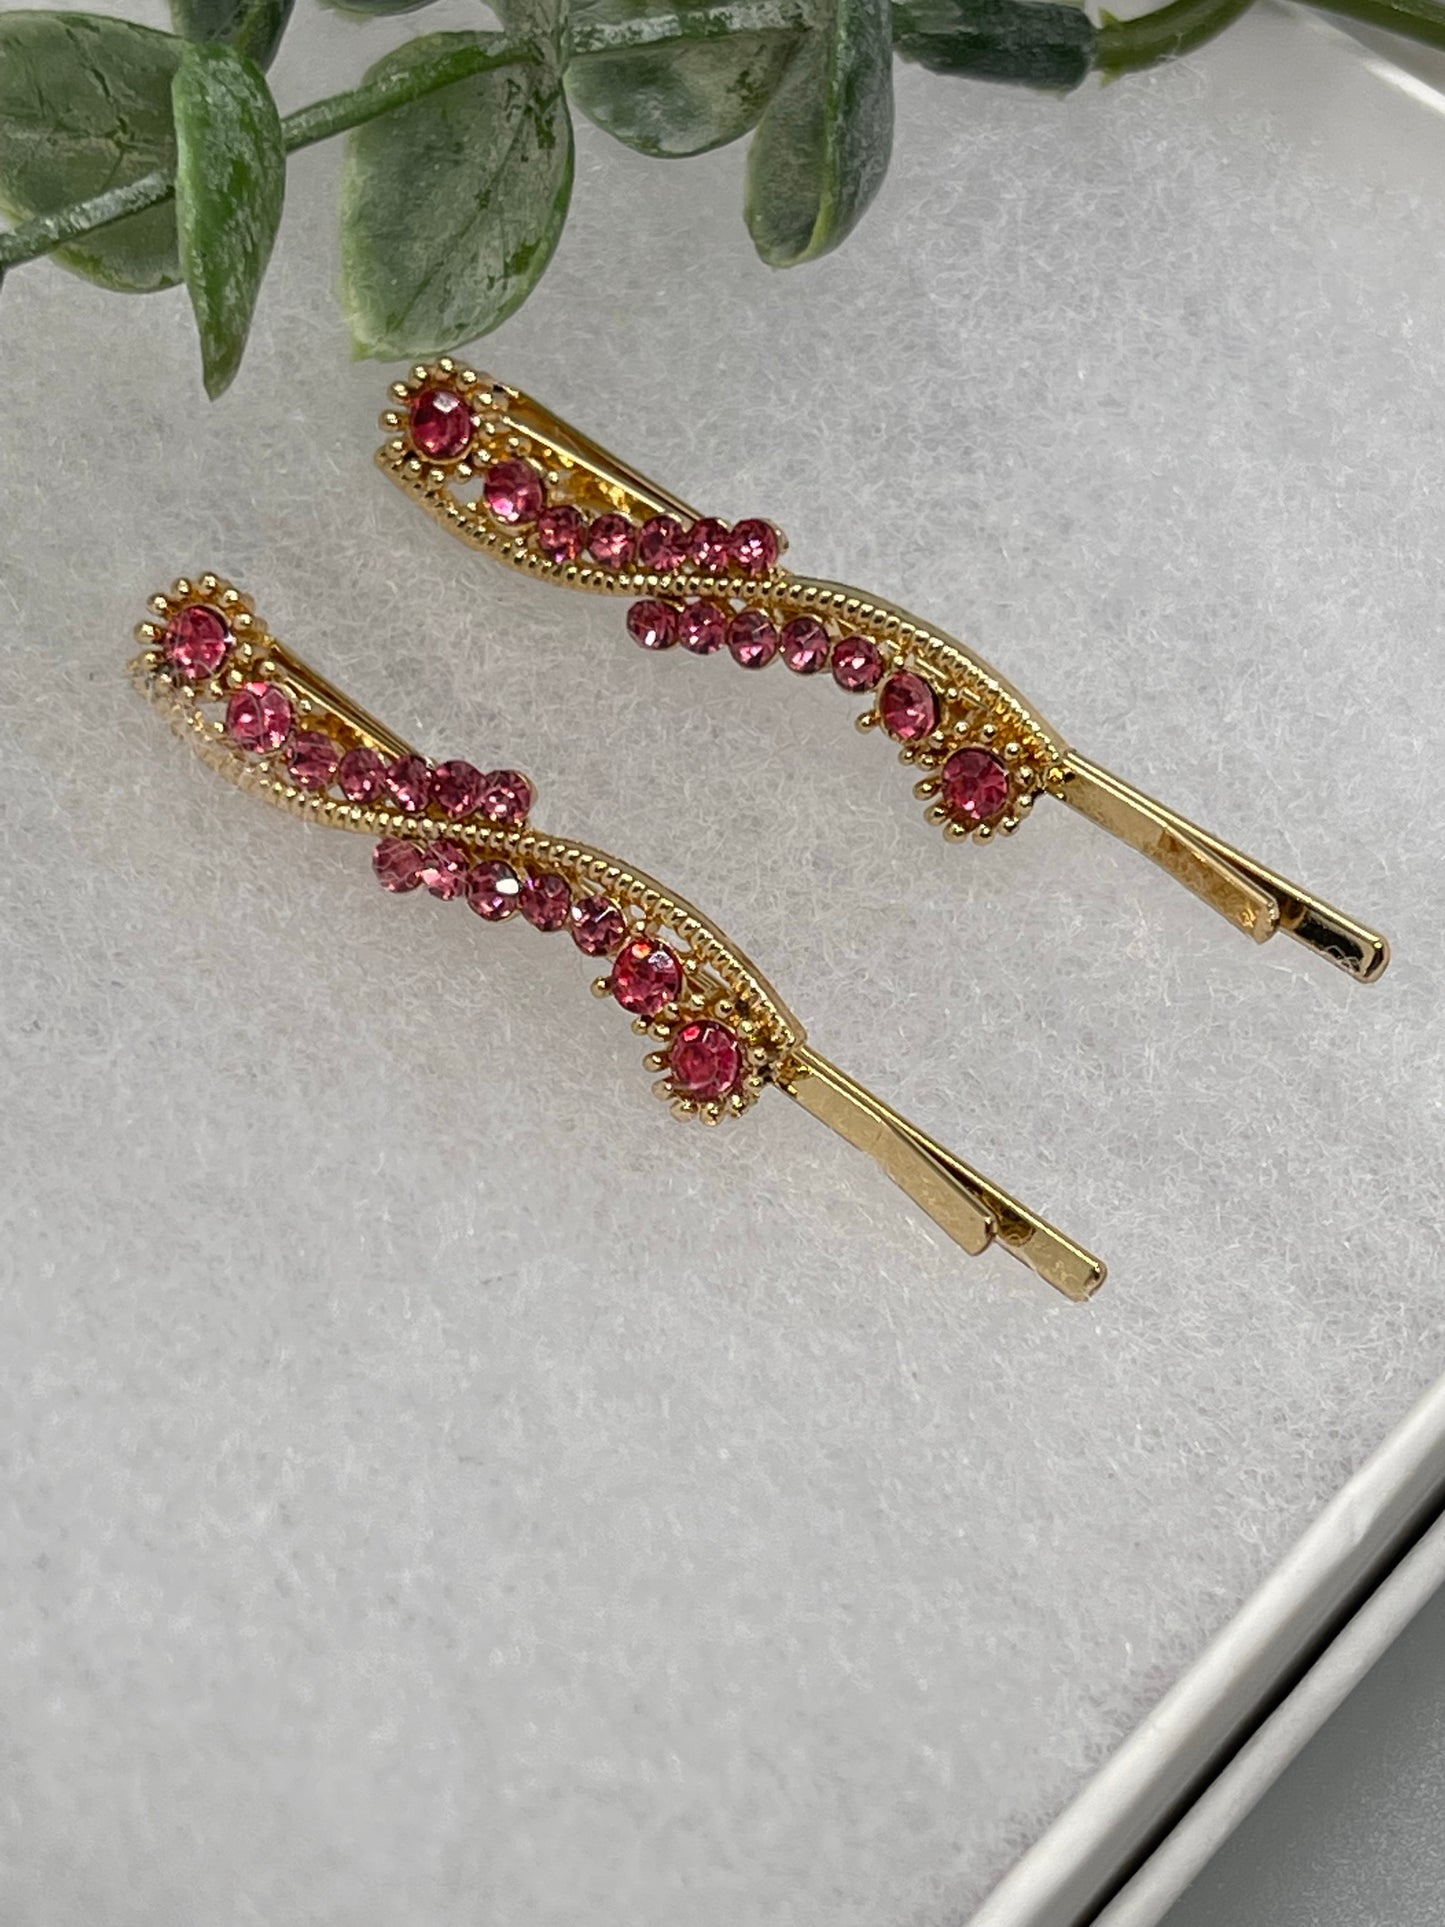 Pink crystal rhinestone approximately 2.5” gold tone hair pins 2 pc set wedding bridal shower engagement formal princess accessory accessories